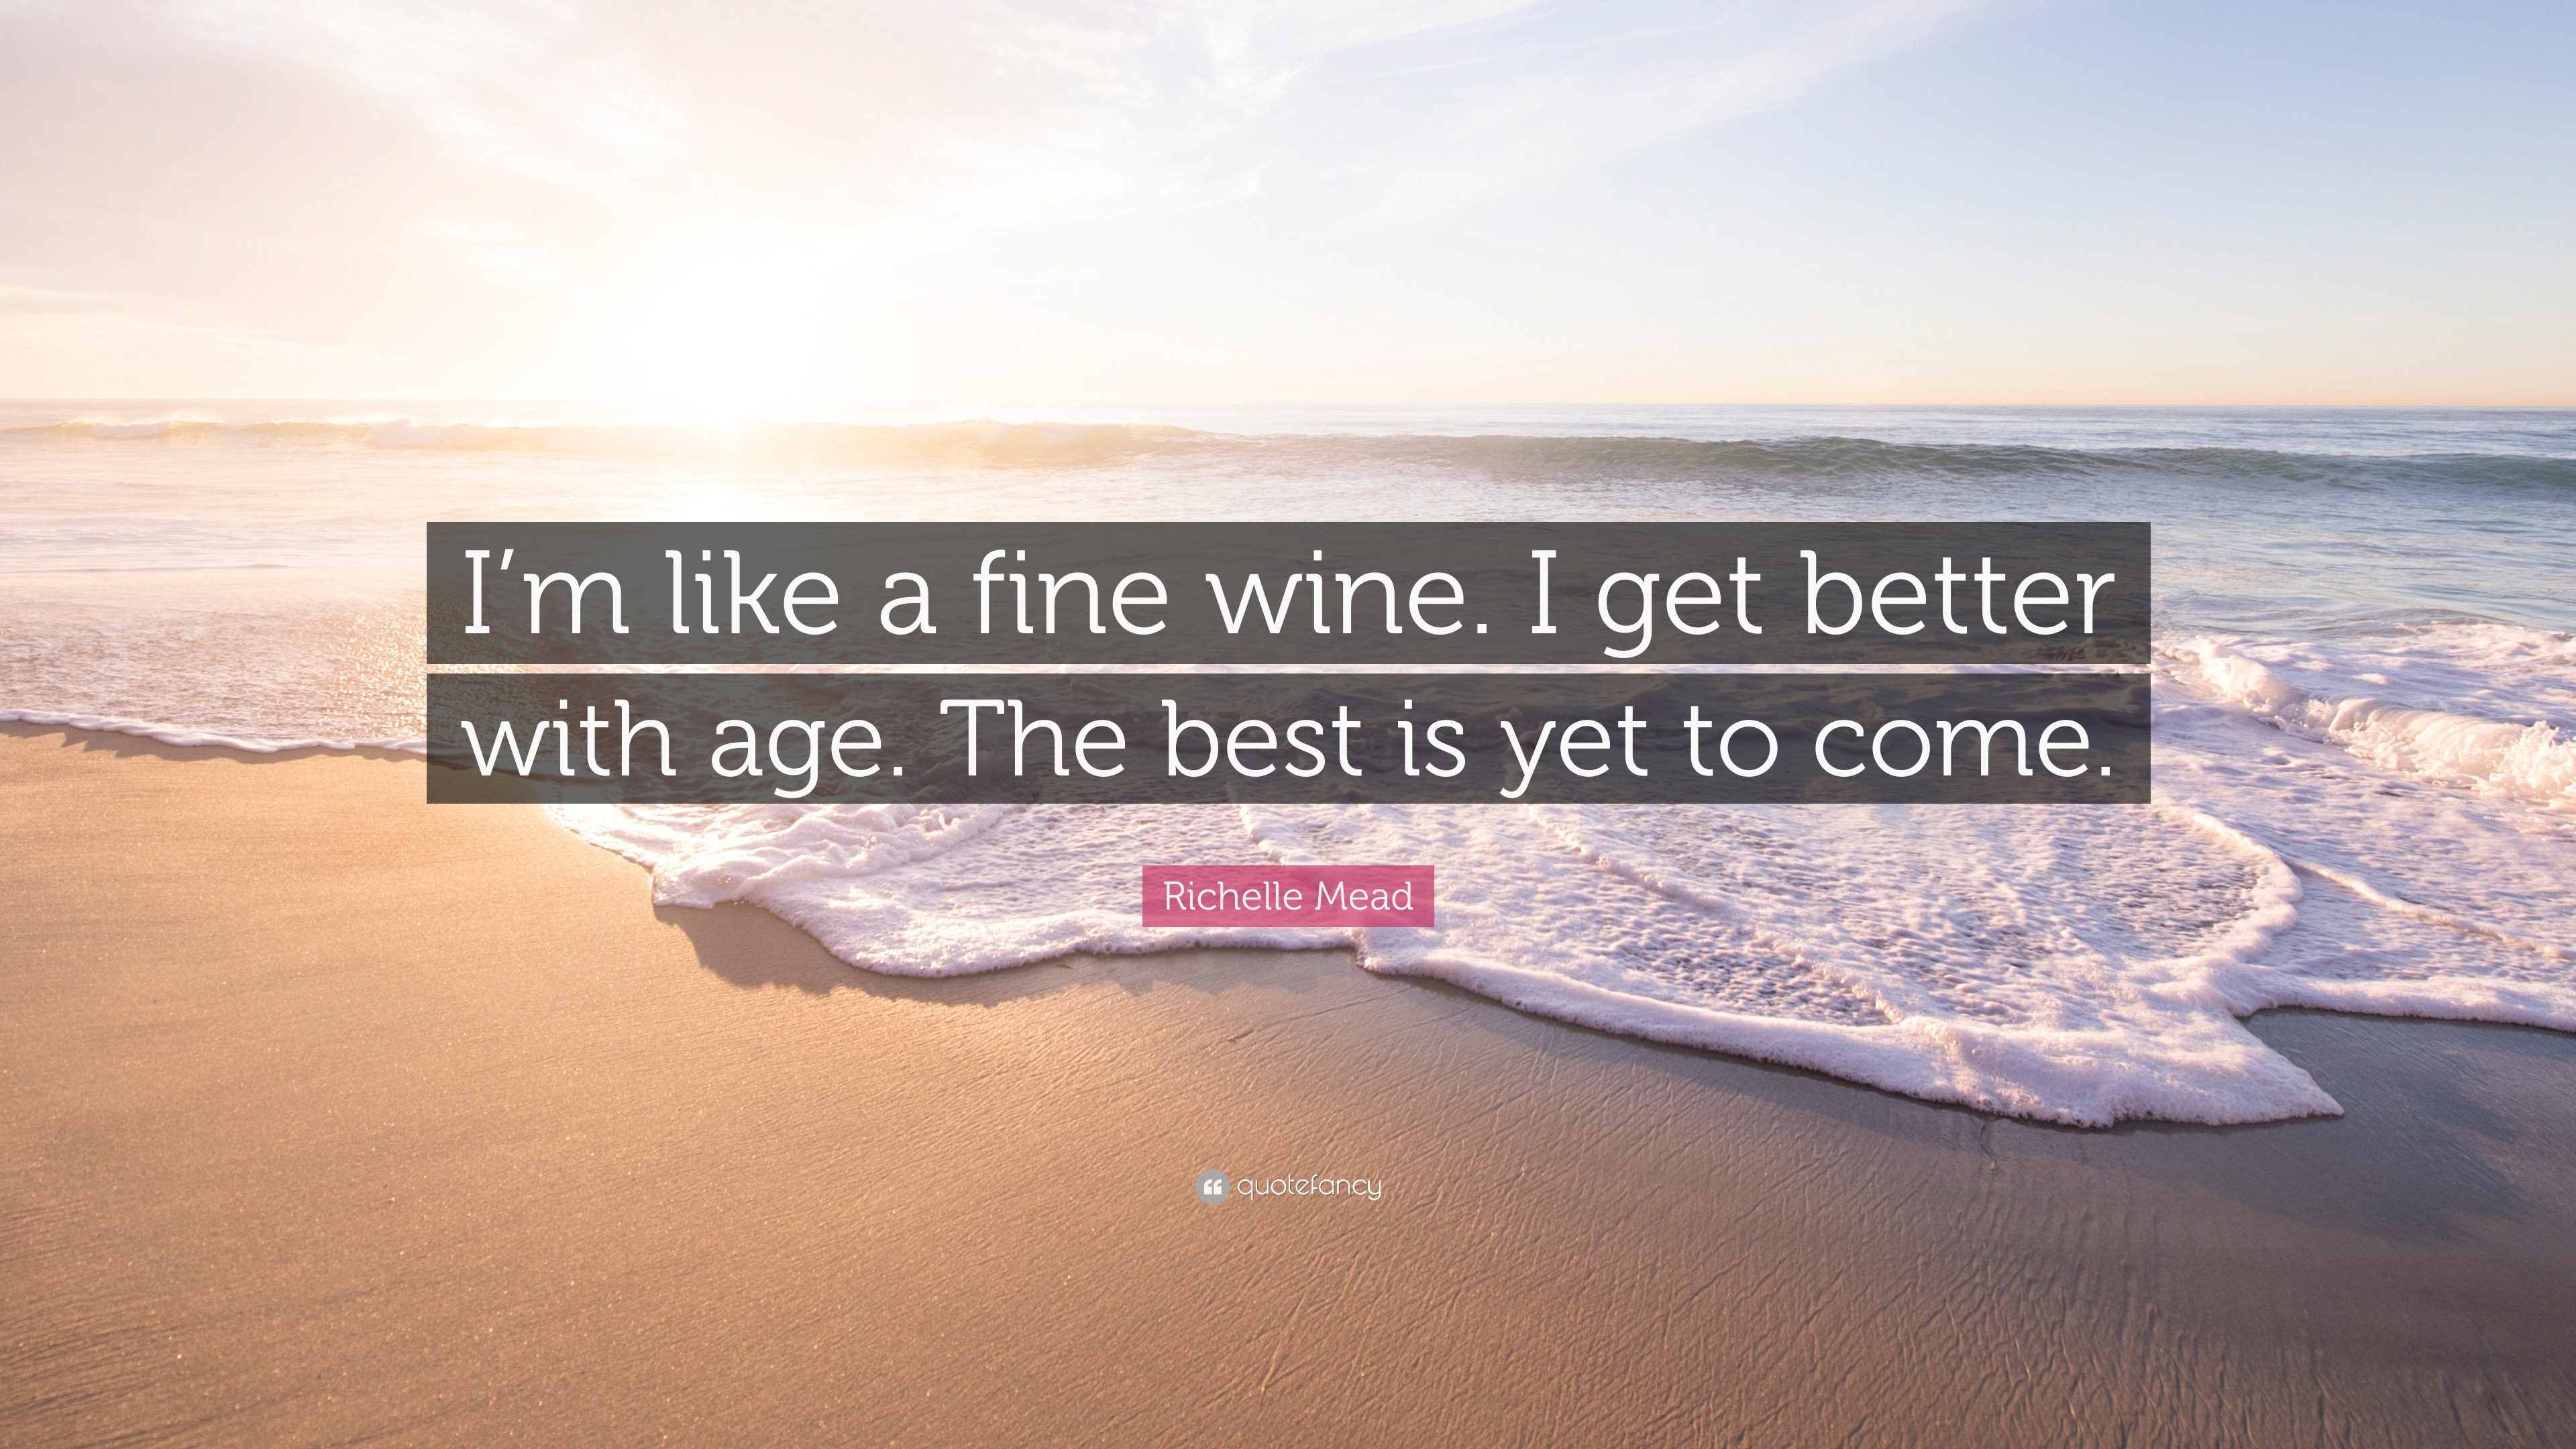 Download Richelle Mead Quote: "I'm like a fine wine. I get better ...